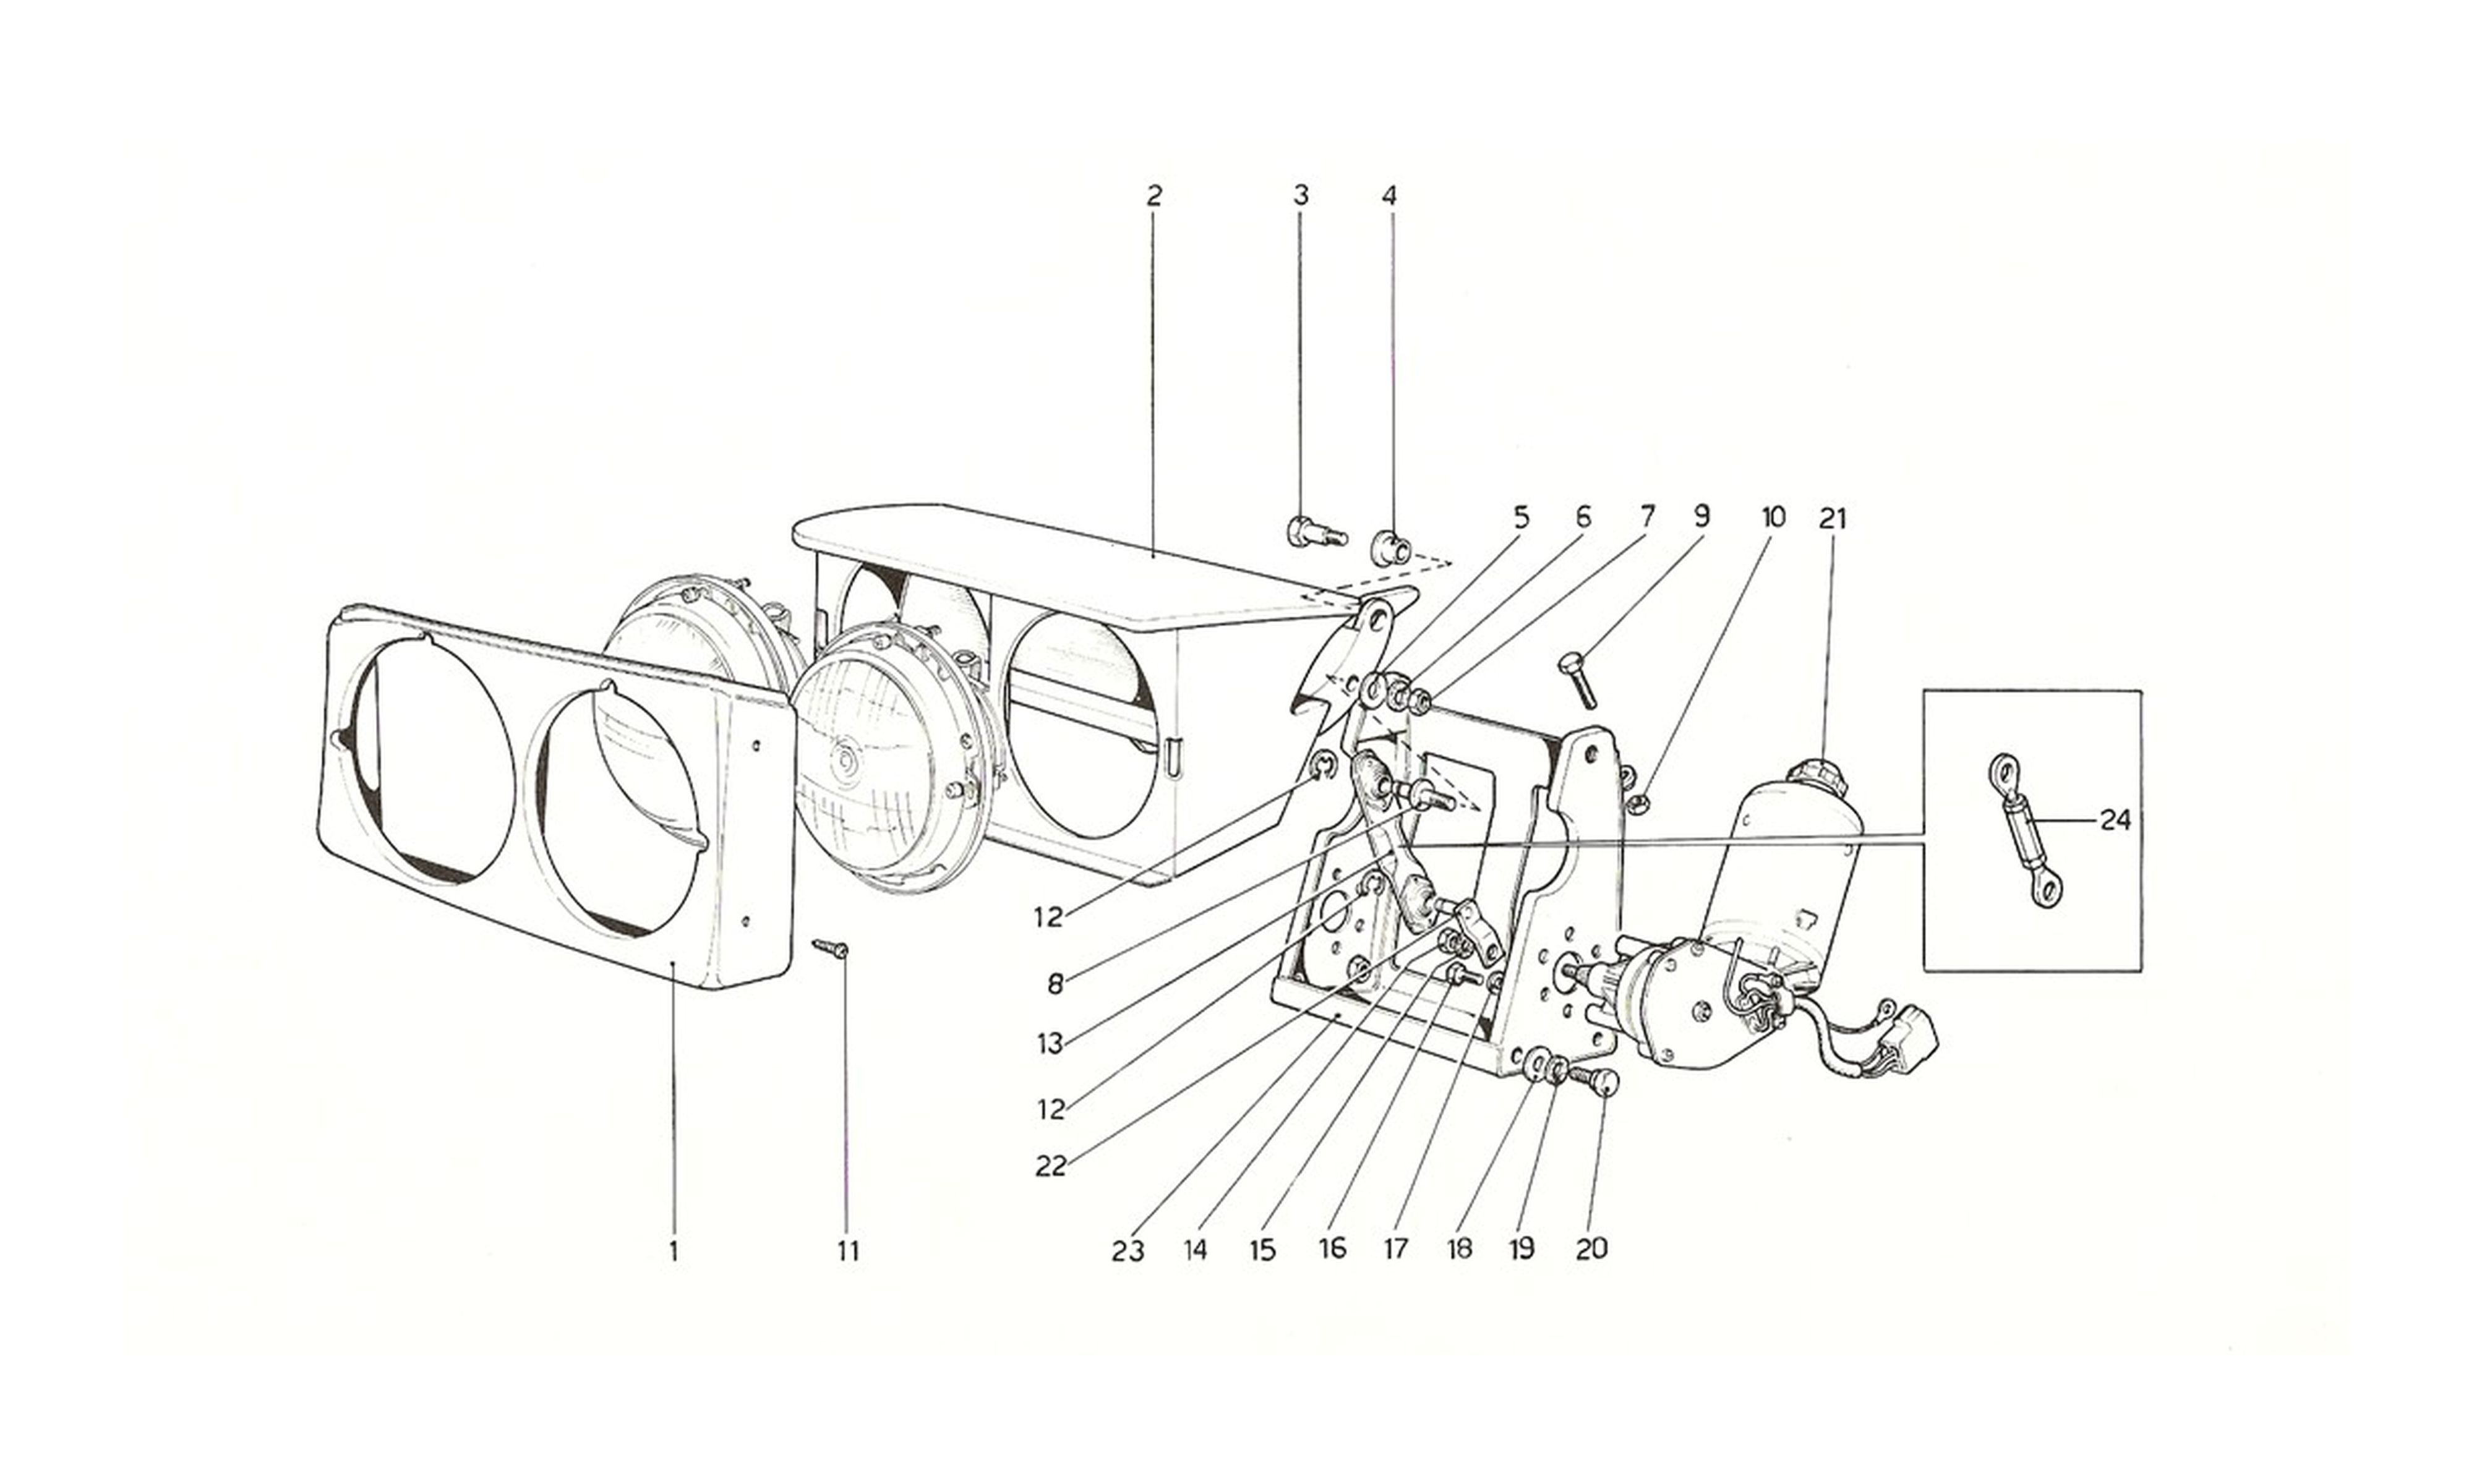 Schematic: Headlights Lifting Device